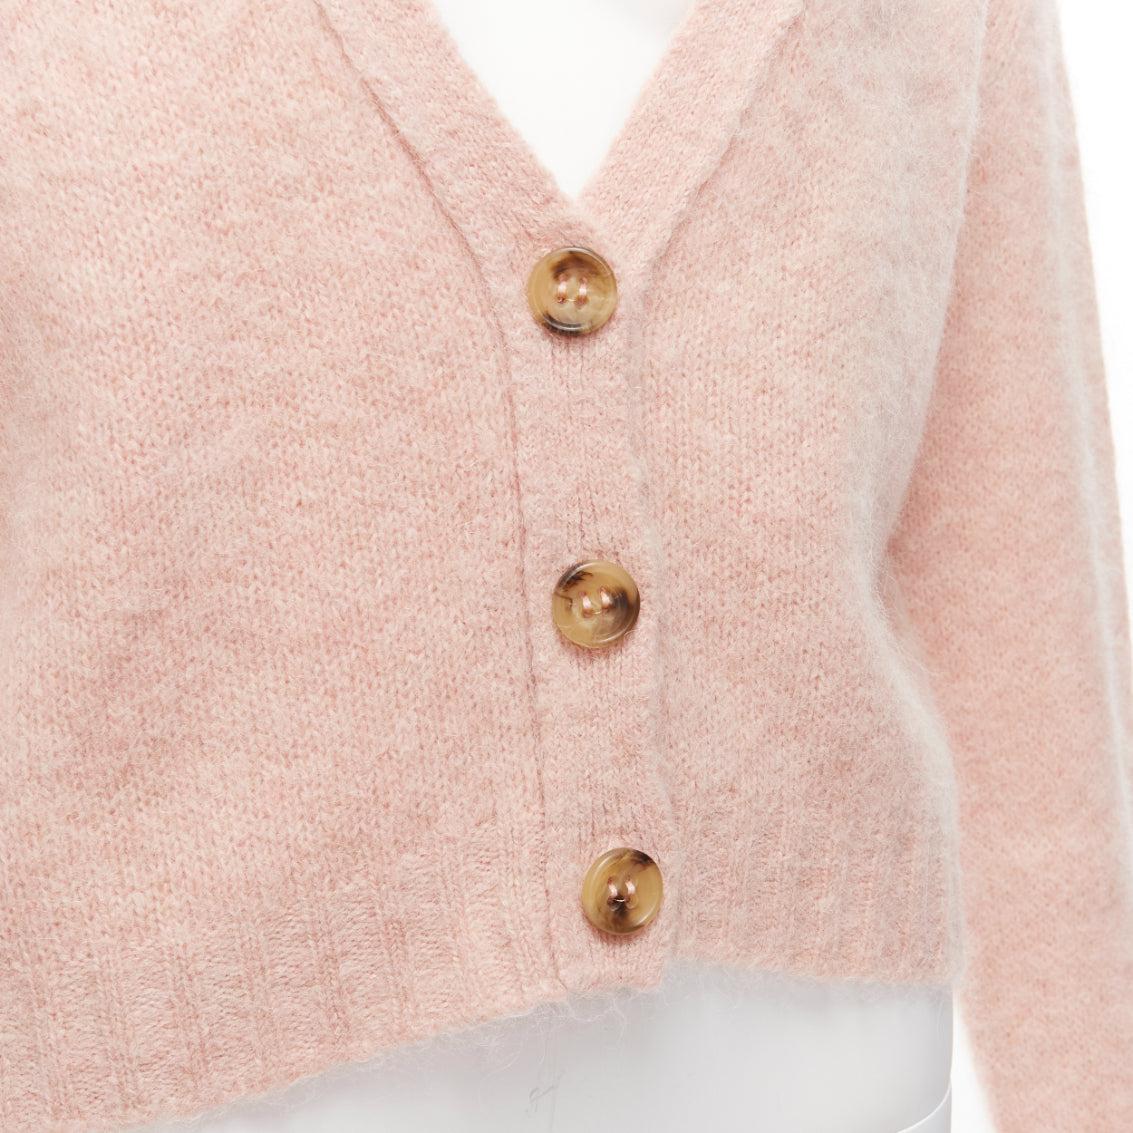 RED VALENTINO pink alpaca blend horn button cardigan sweater XS
Reference: KYCG/A00021
Brand: Red Valentino
Material: Acrylic, Alpaca, Blend
Color: Pink
Pattern: Solid
Closure: Button
Made in: Romania

CONDITION:
Condition: Excellent, this item was